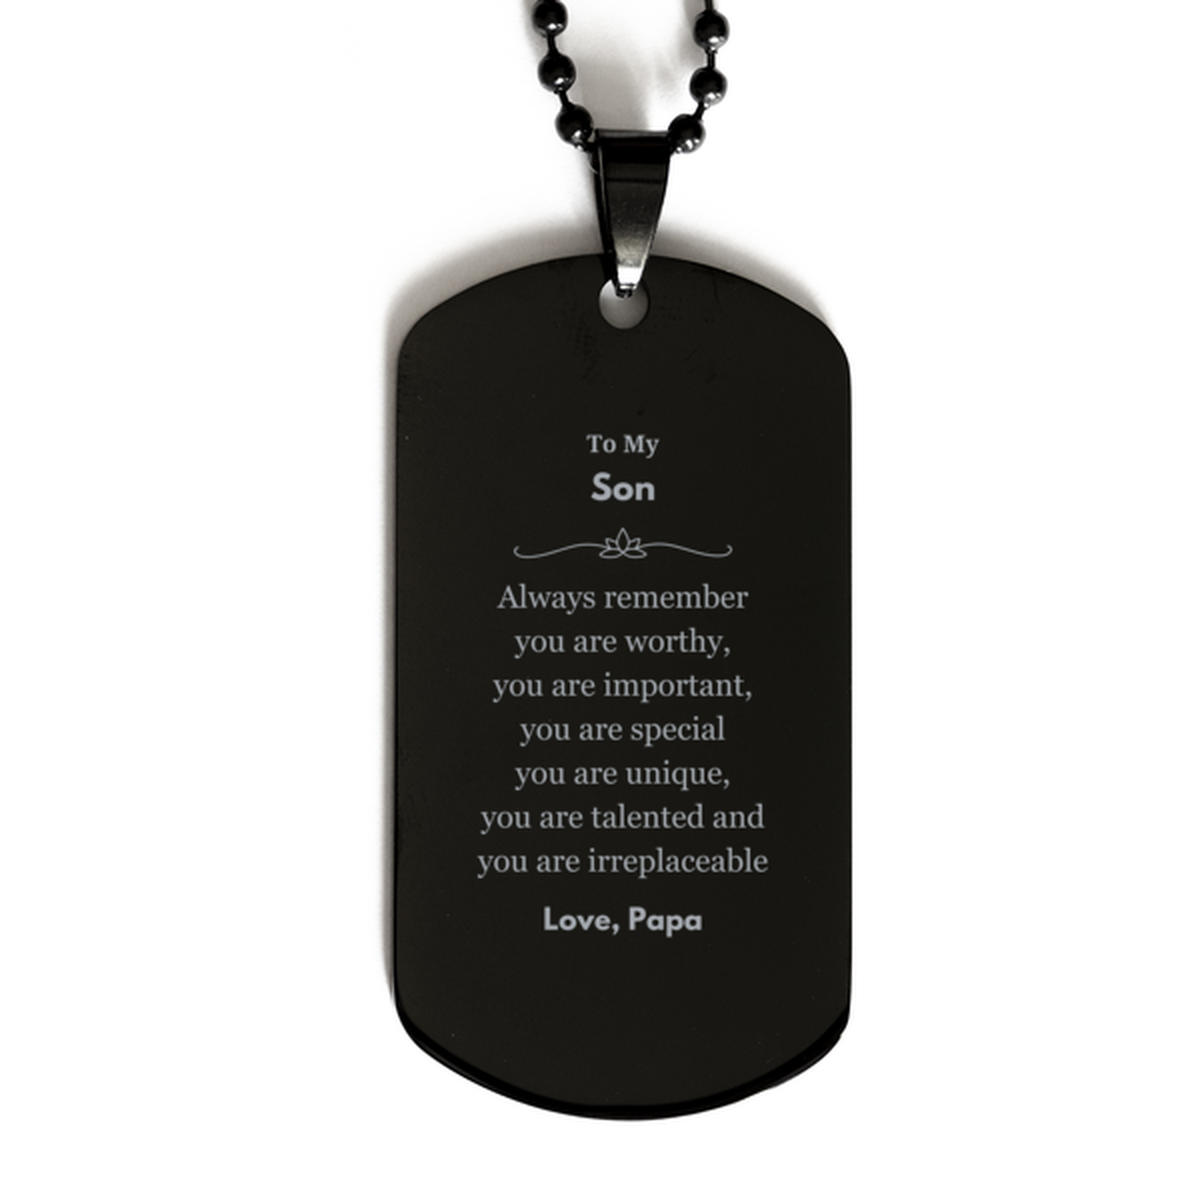 Son Birthday Gifts from Papa, Inspirational Black Dog Tag for Son Christmas Graduation Gifts for Son Always remember you are worthy, you are important. Love, Papa